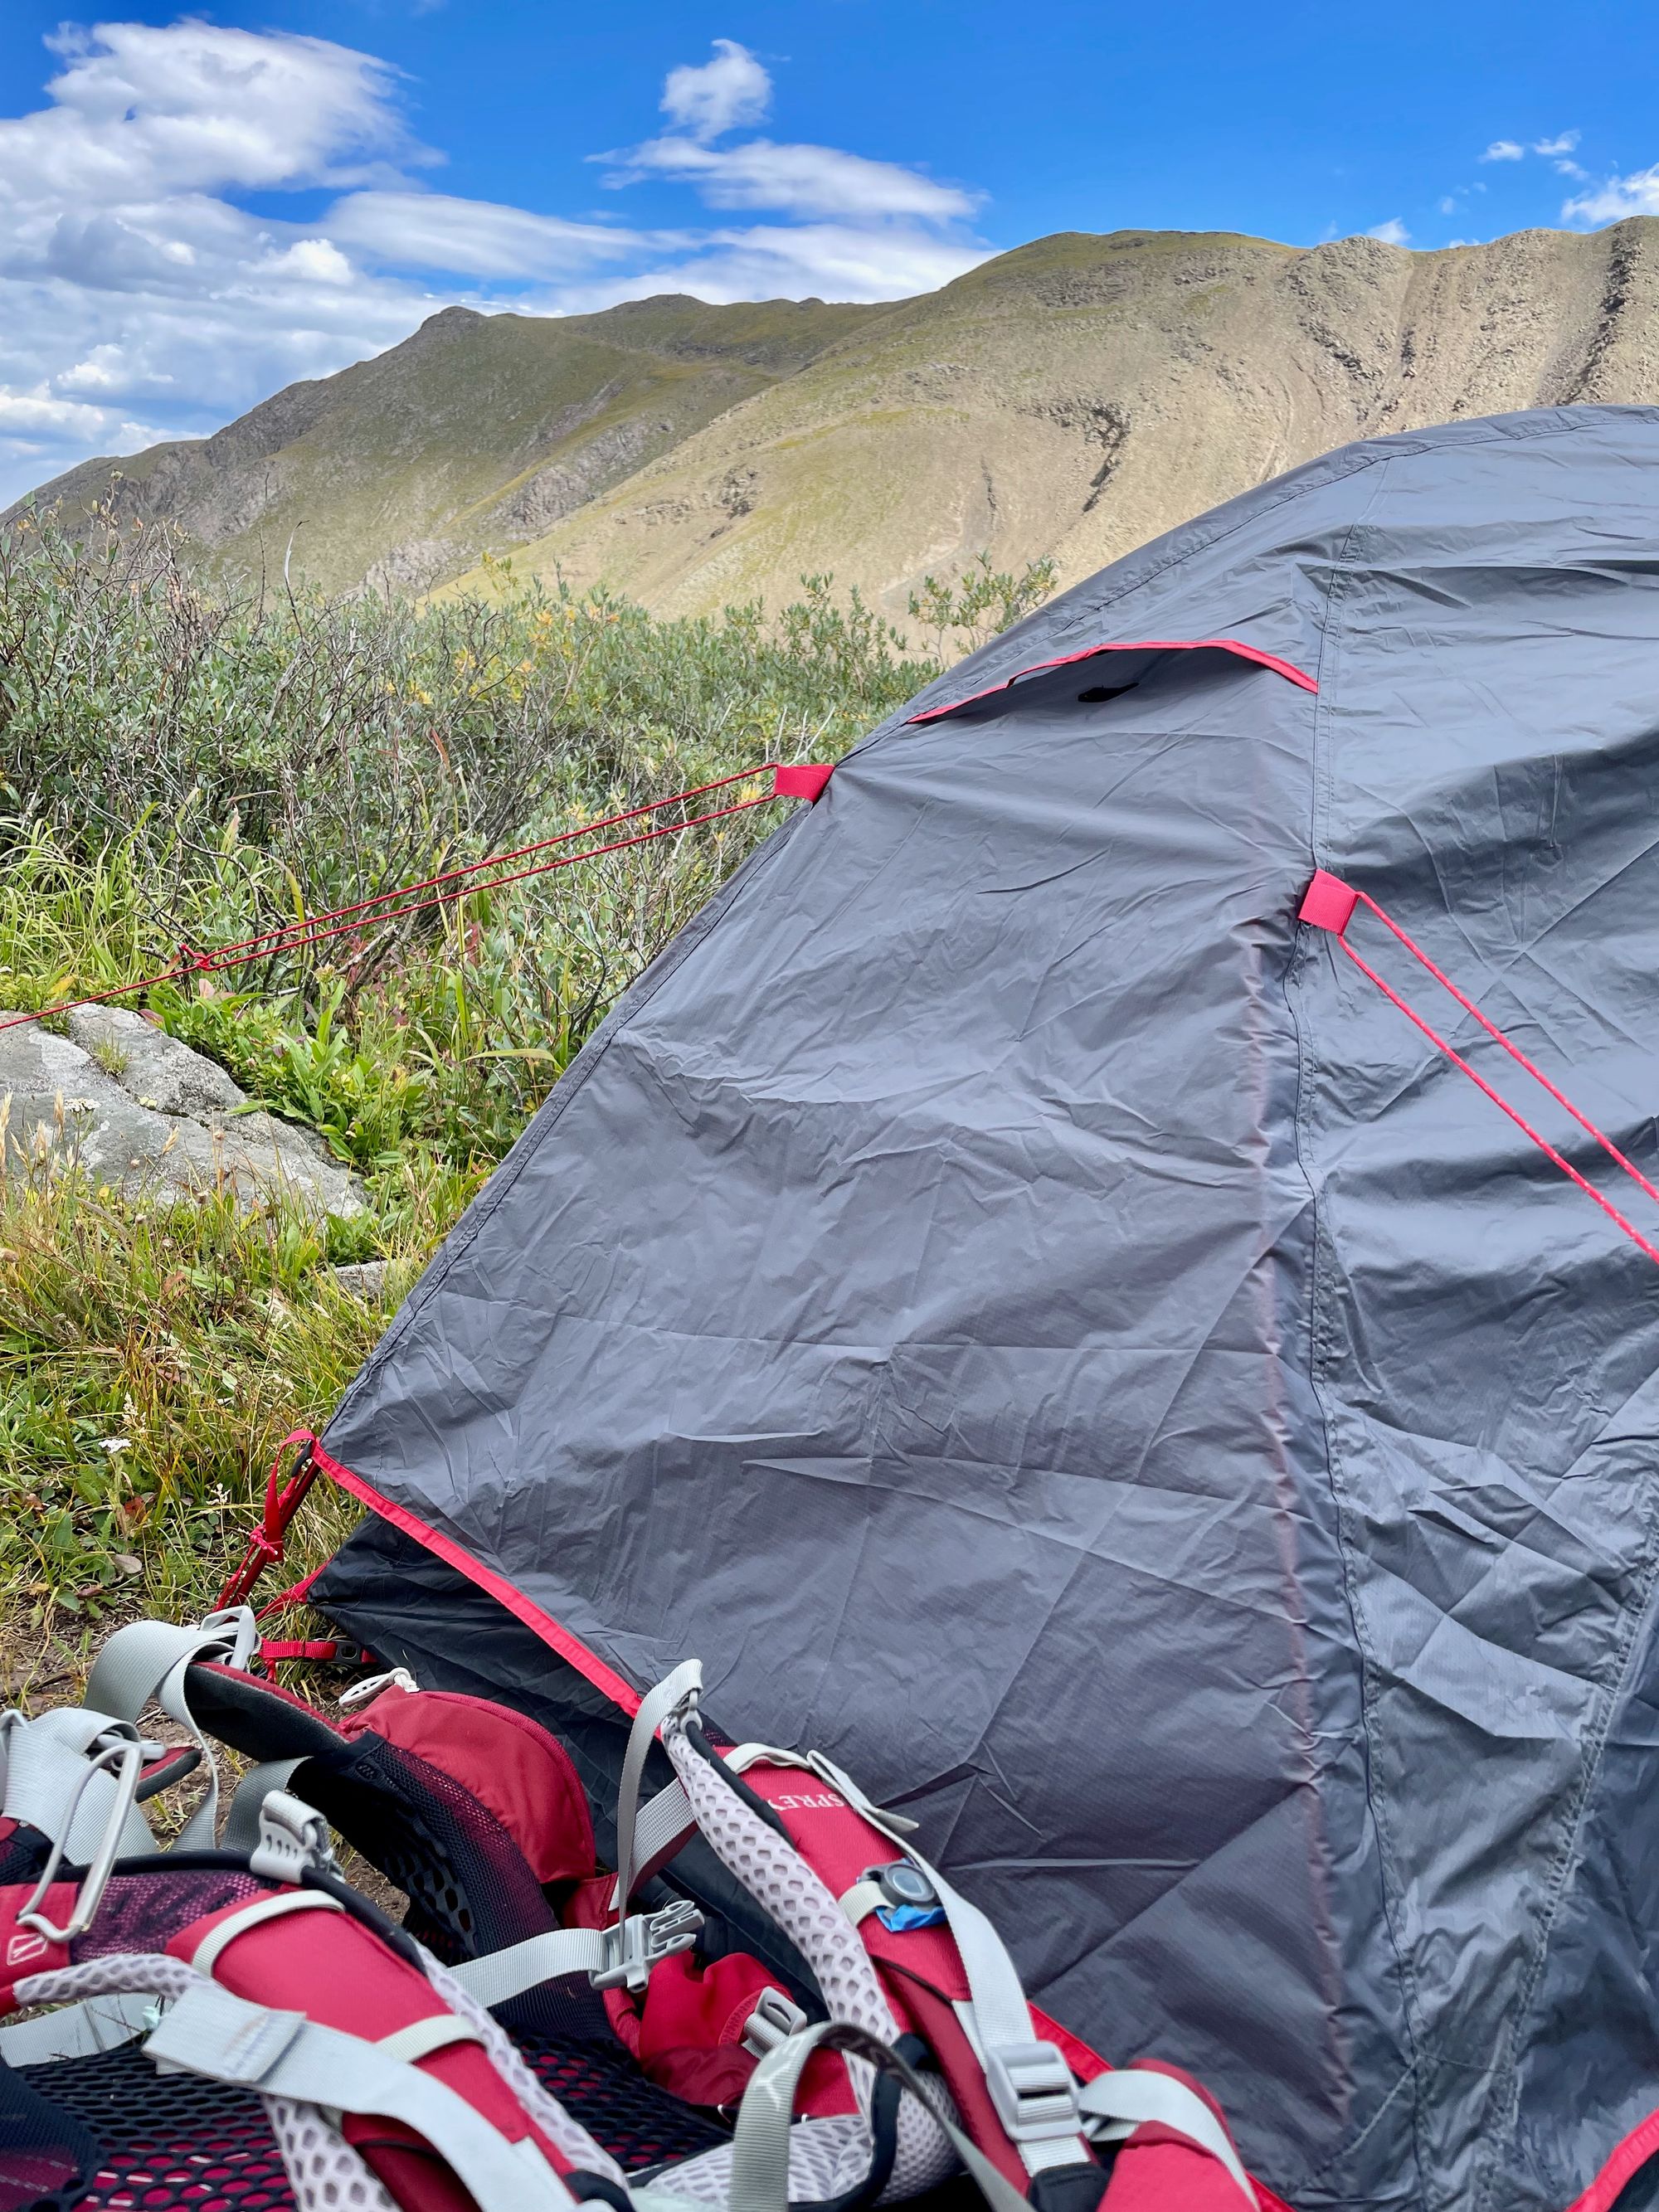 Backpack and tent in foreground; mountains behind.